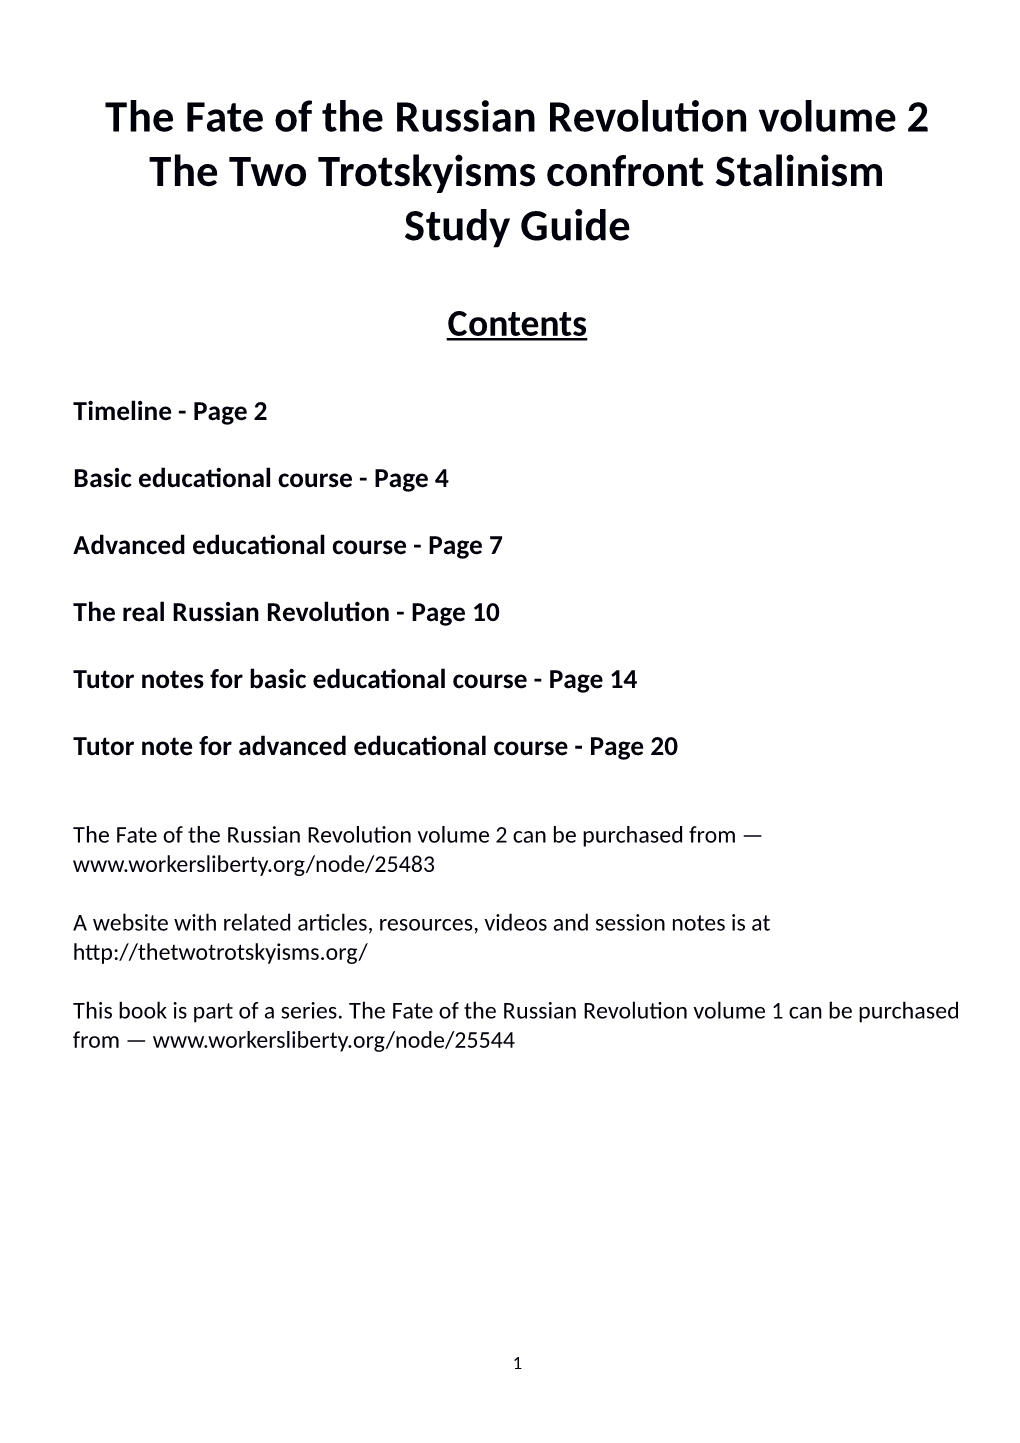 The Fate of the Russian Revolution Volume 2 the Two Trotskyisms Confront Stalinism Study Guide